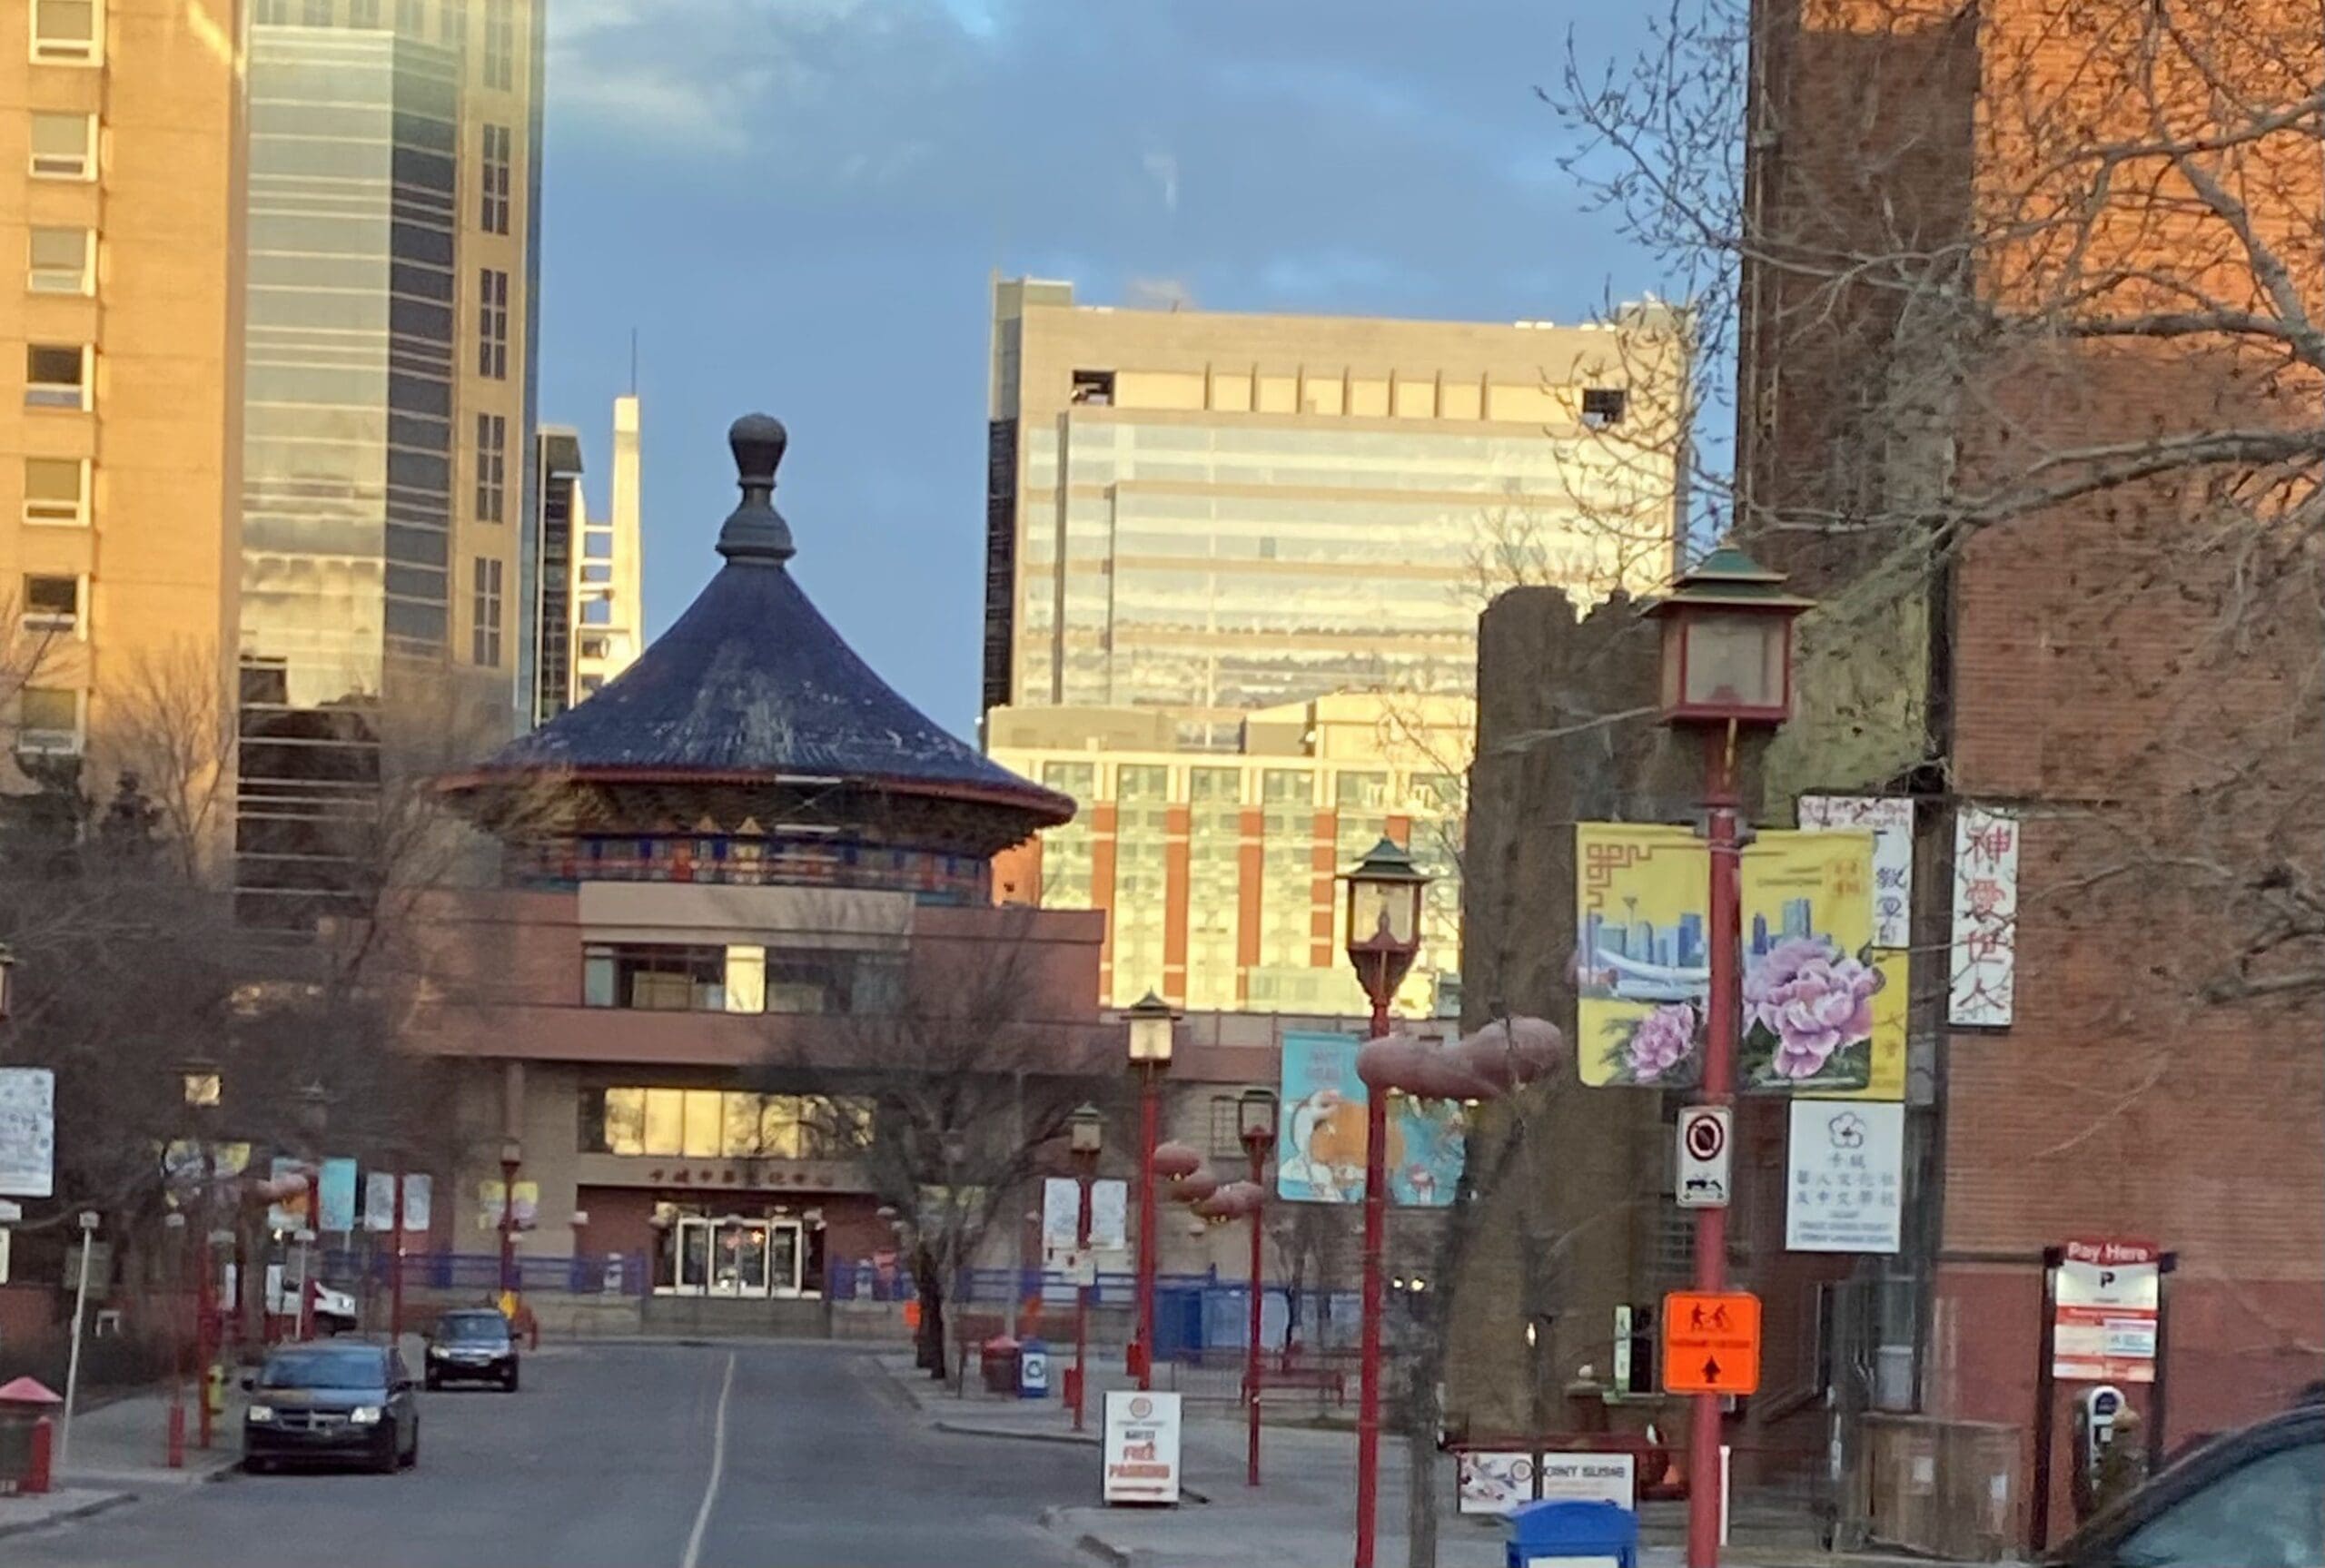 This is Chinatown, specifically the Chinese Cultural Centre in downtown Calgary.